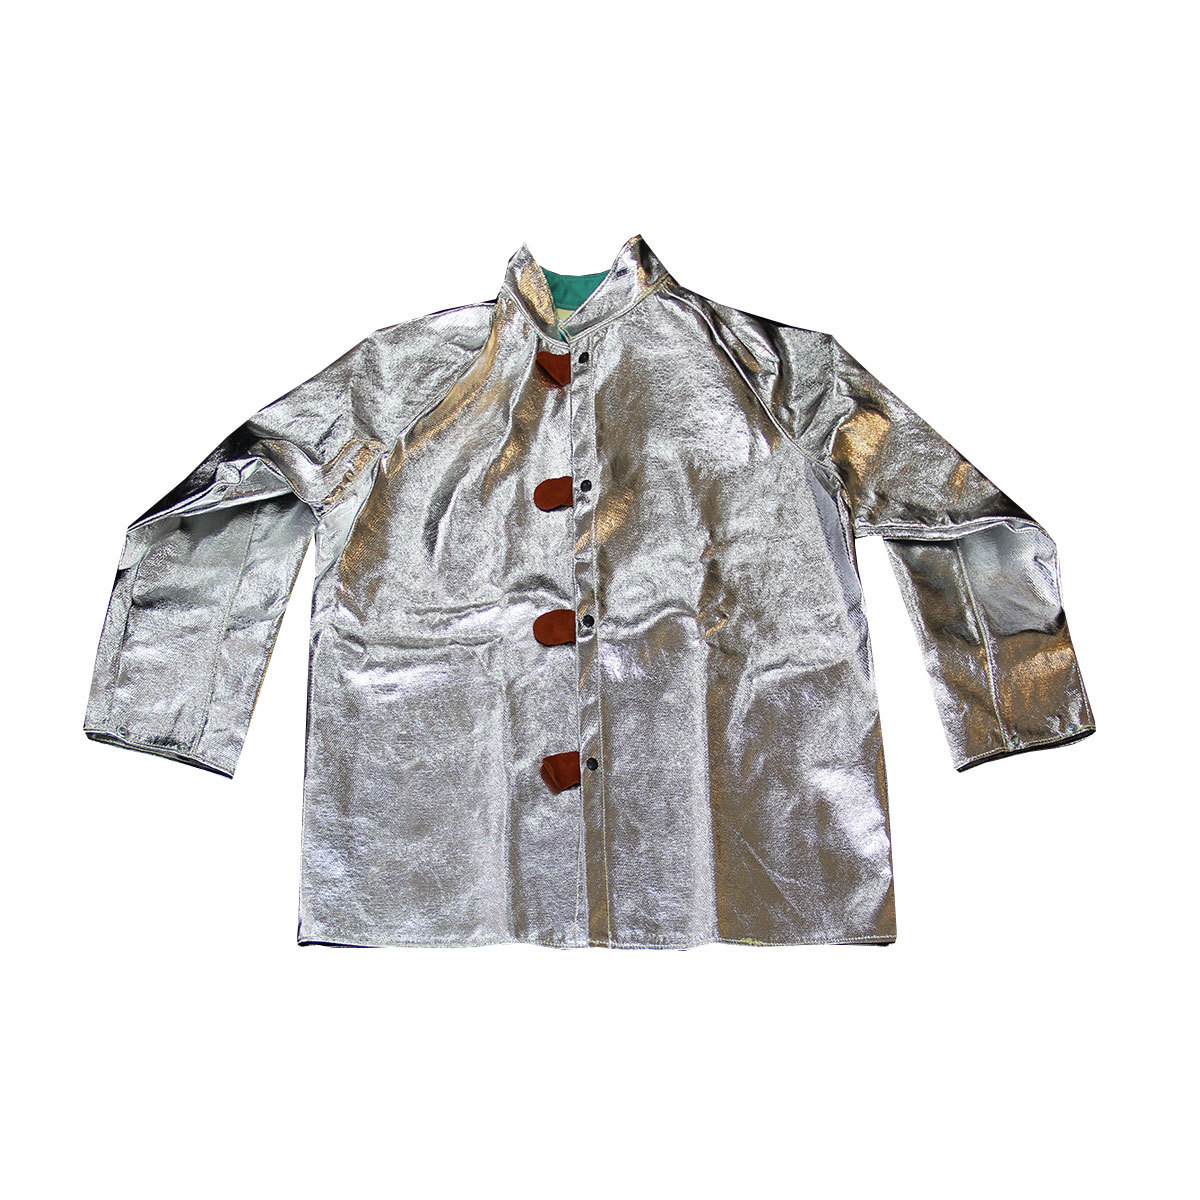 Chicago Protective Apparel Large Silver Aluminized Para-Aramid Blend Heat Resistant Jacket